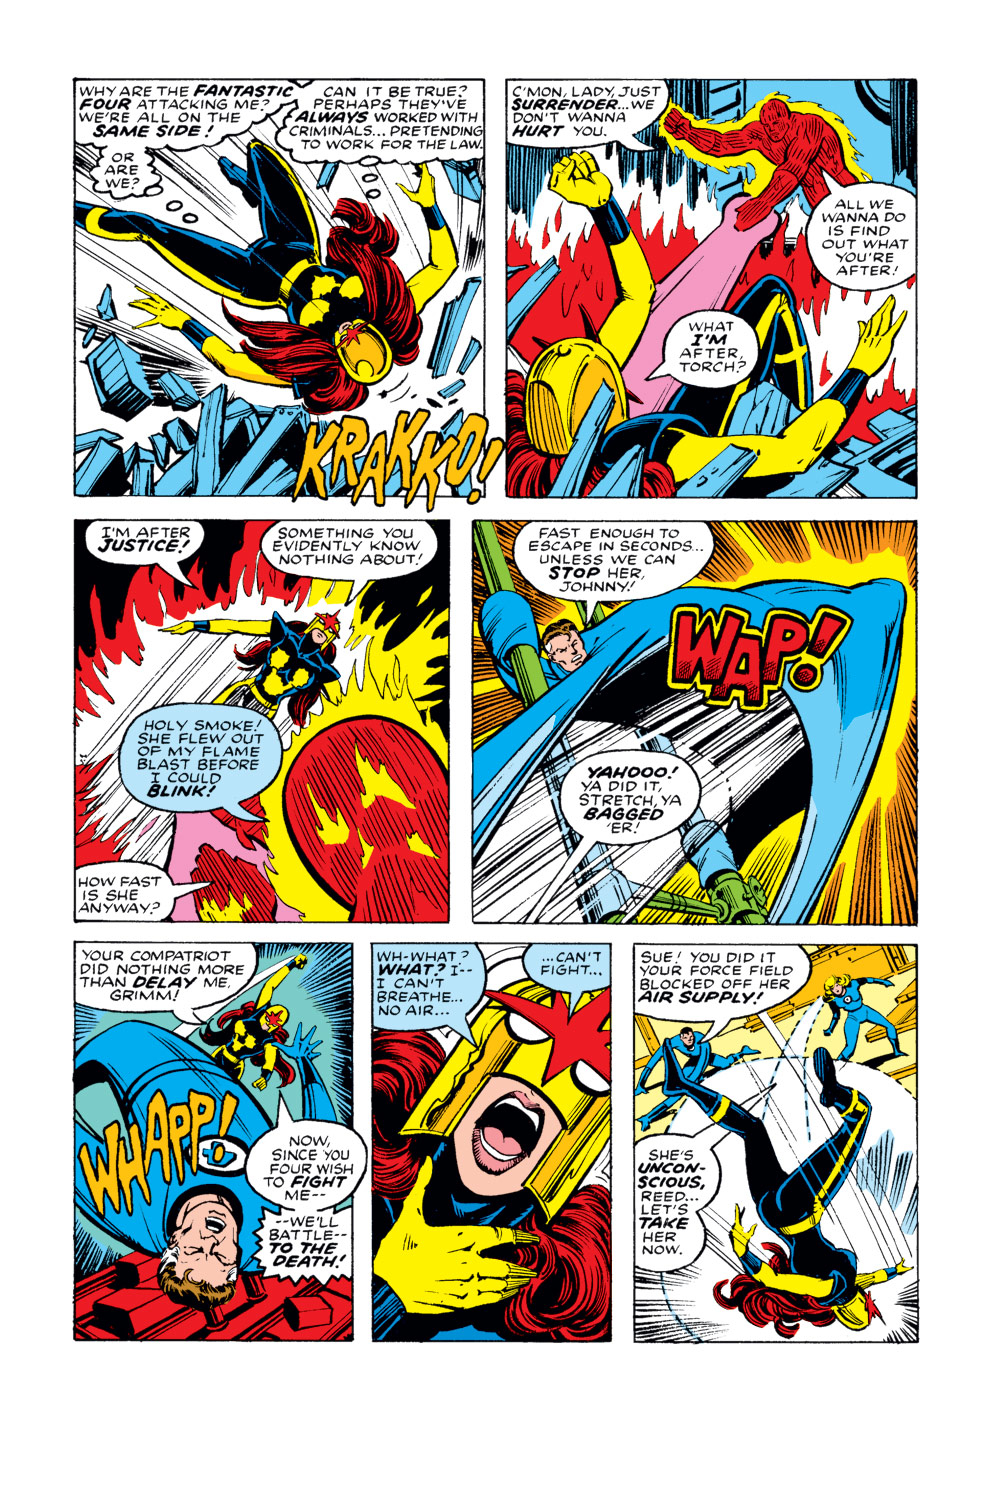 What If? (1977) issue 15 - Nova had been four other people - Page 11